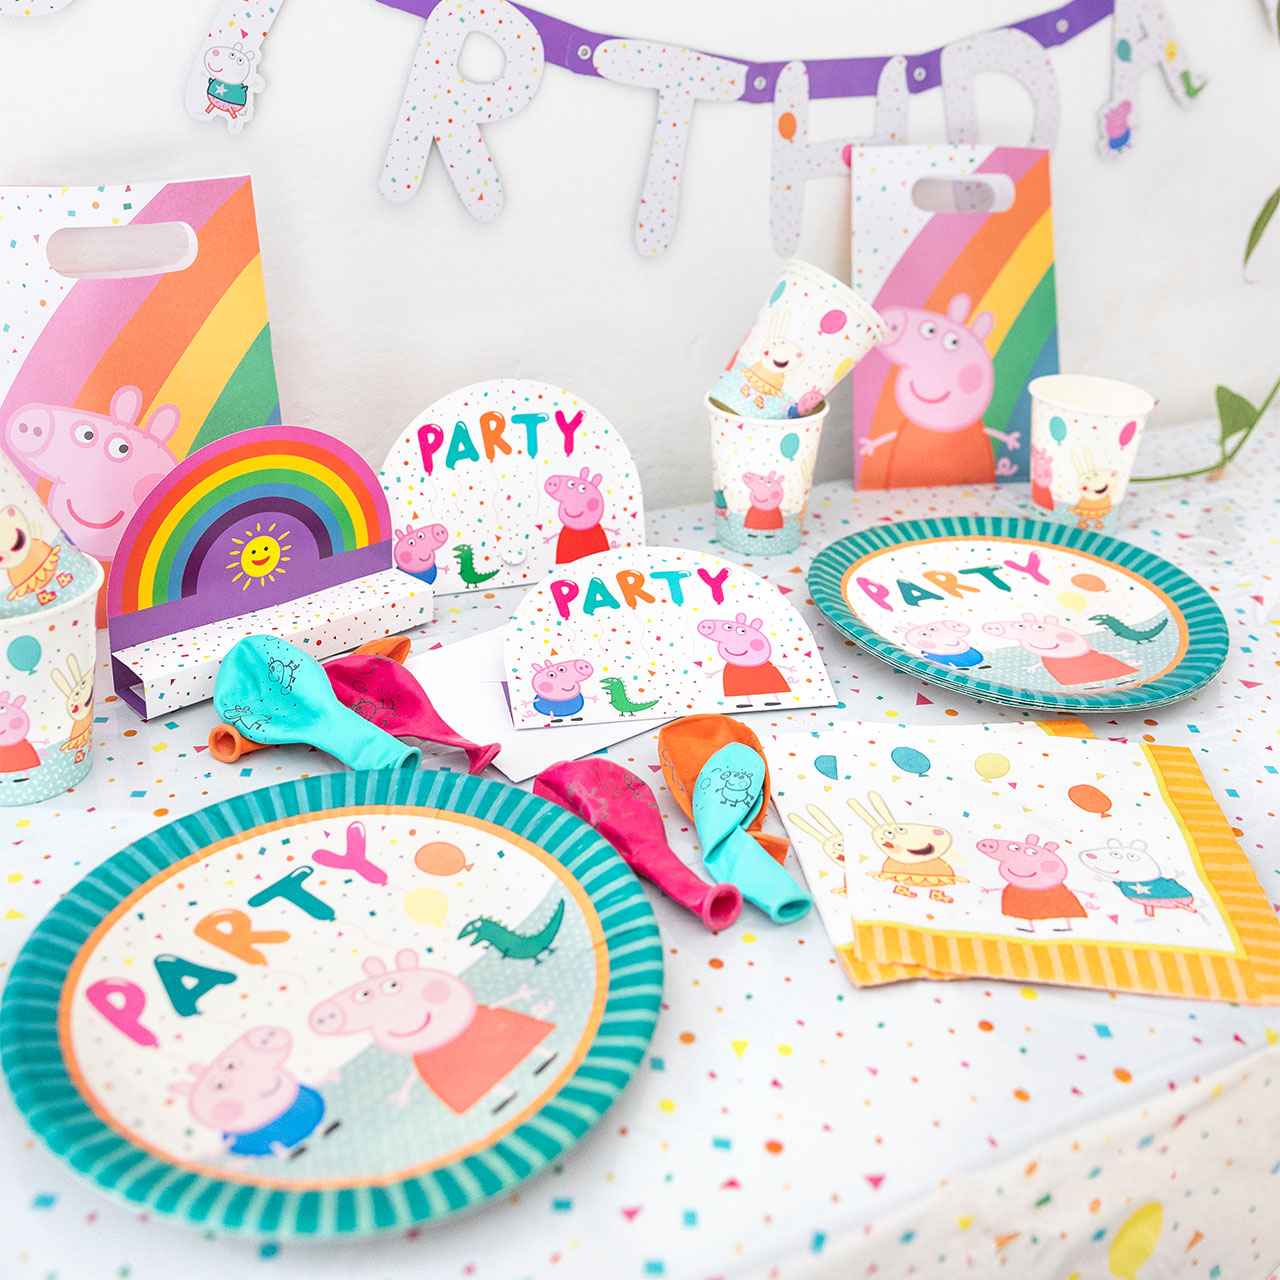 8 Peppa Pig Party Plates